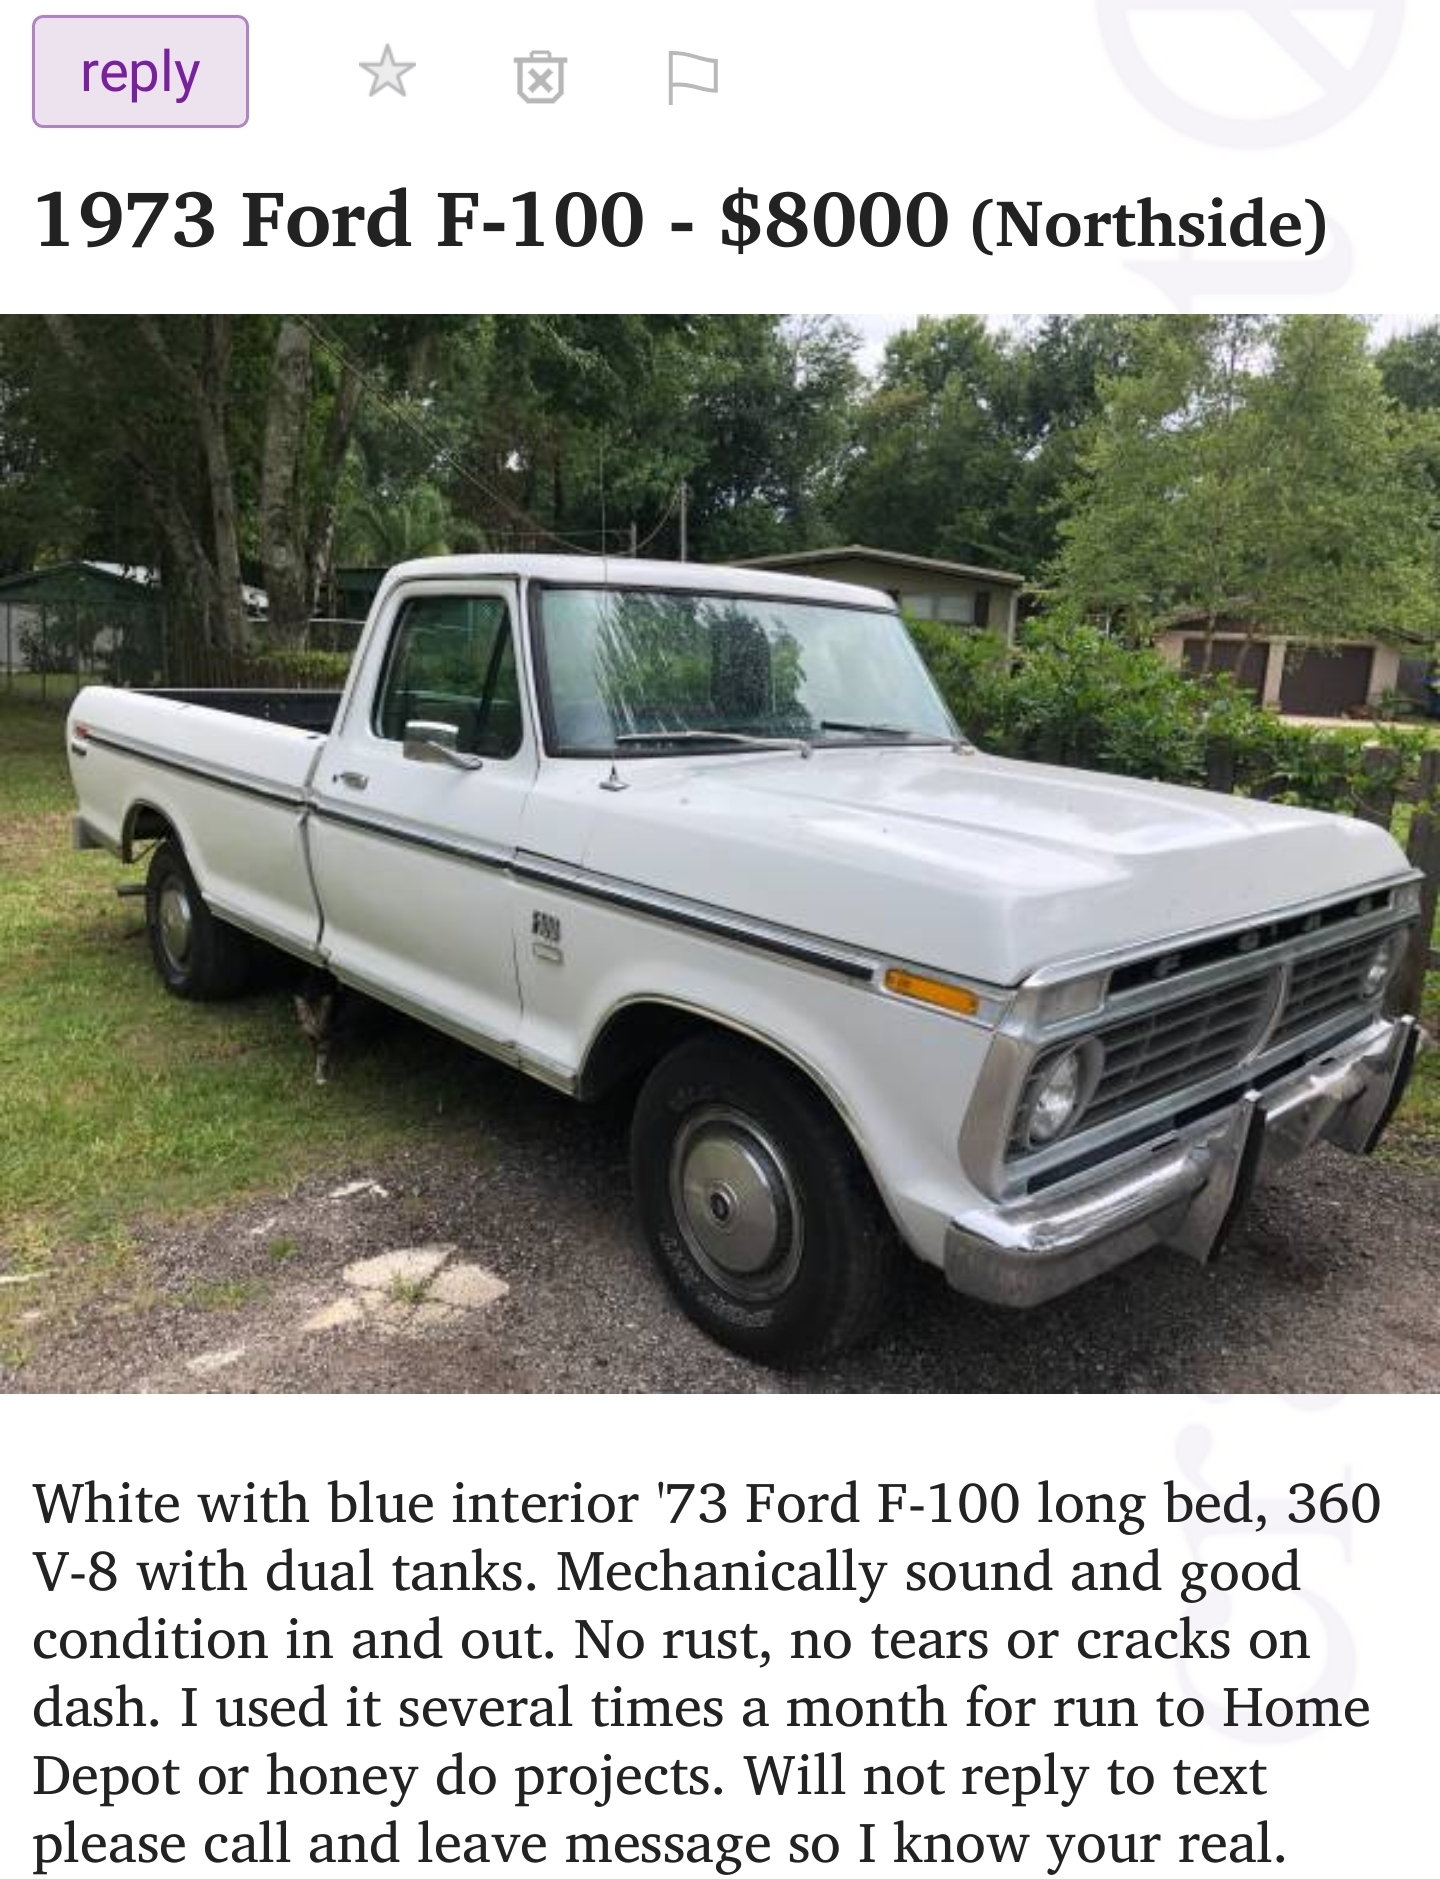 Craigslist find of the week! - Page 244 - Ford Truck ...